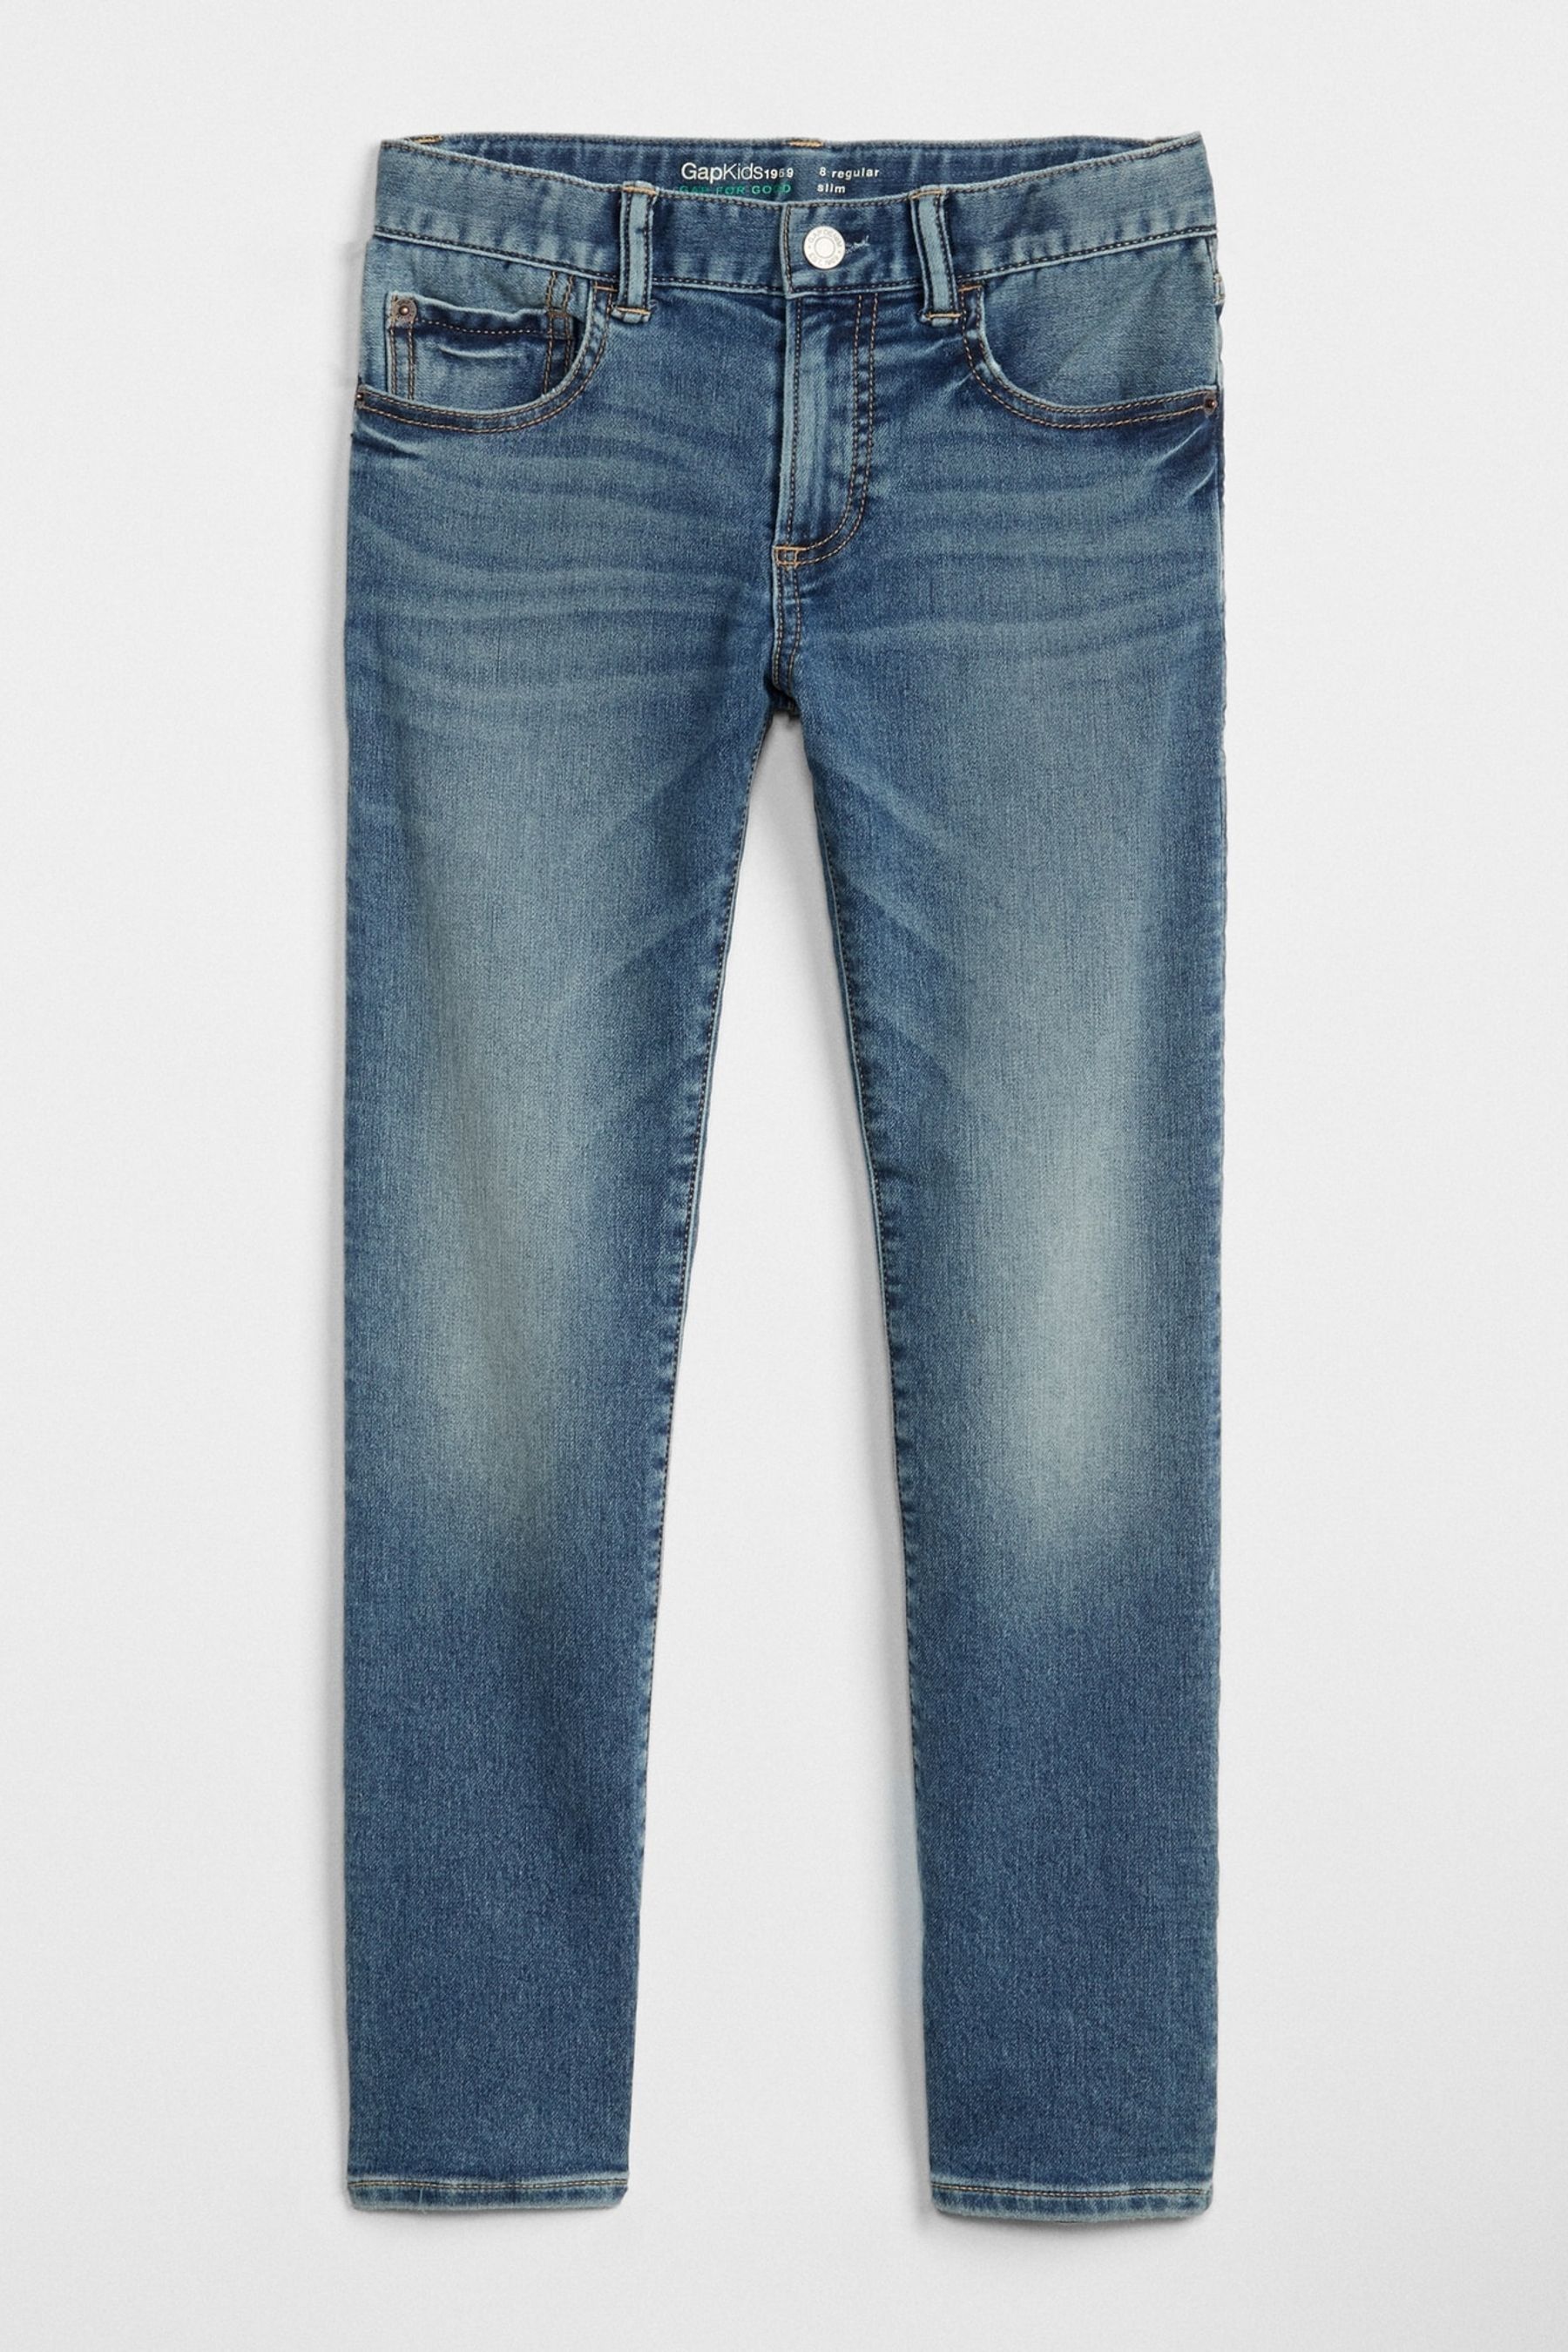 Buy Gap Blue Slim Jeans from the Next UK online shop